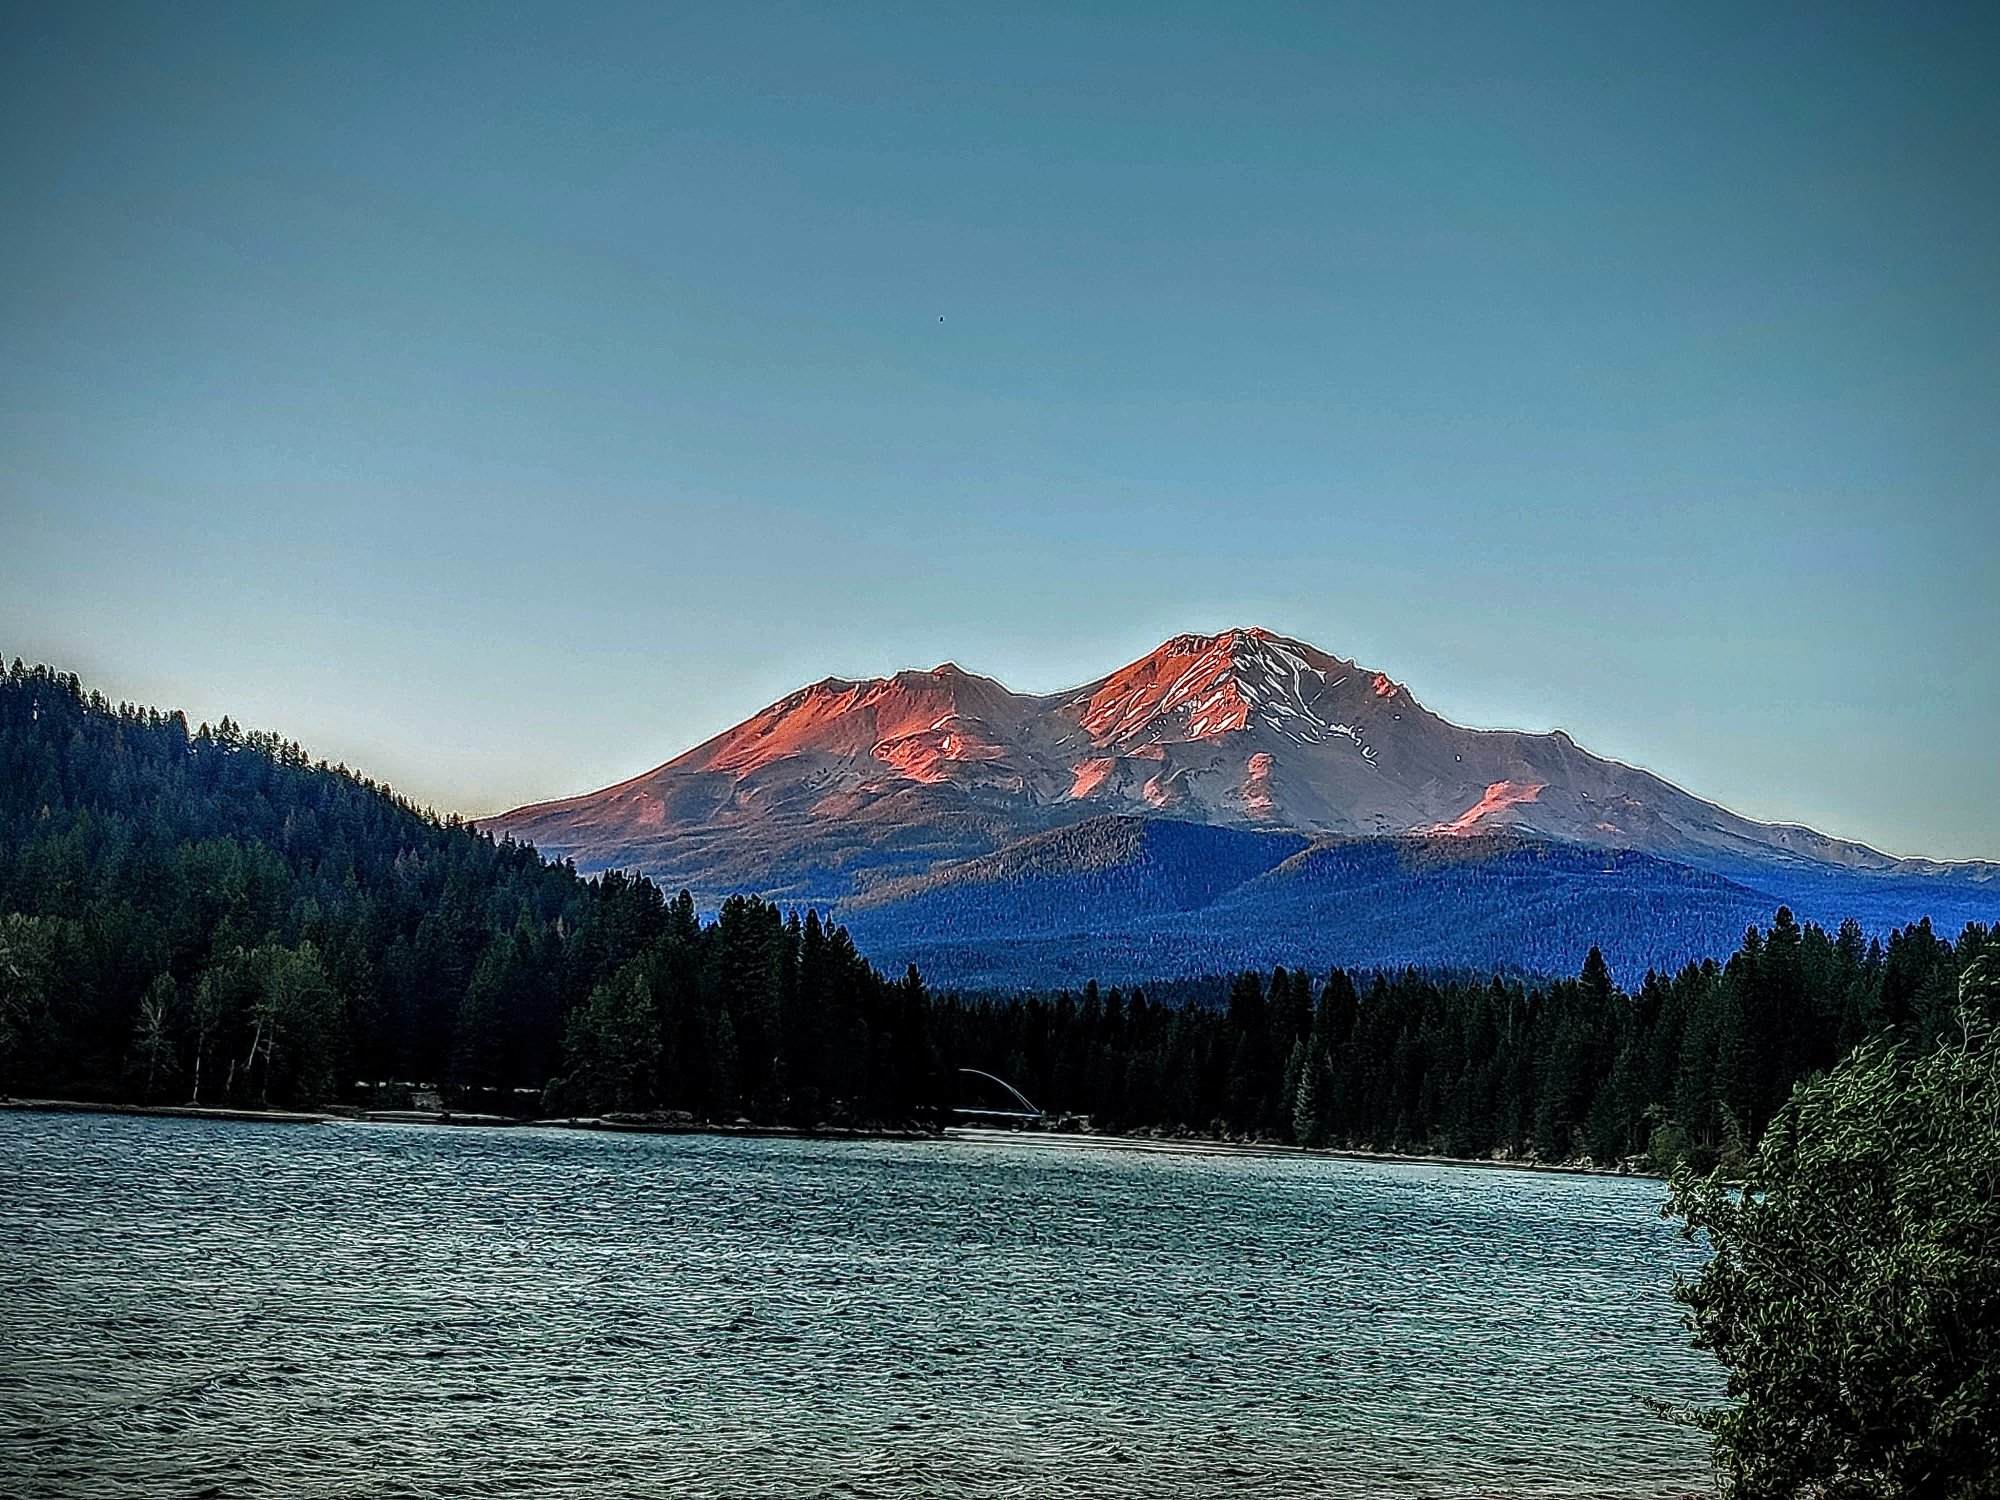 A picturesque lake with a majestic mountain in the background, providing a serene backdrop for participants of the Redding Marathon and Marathon Relay.